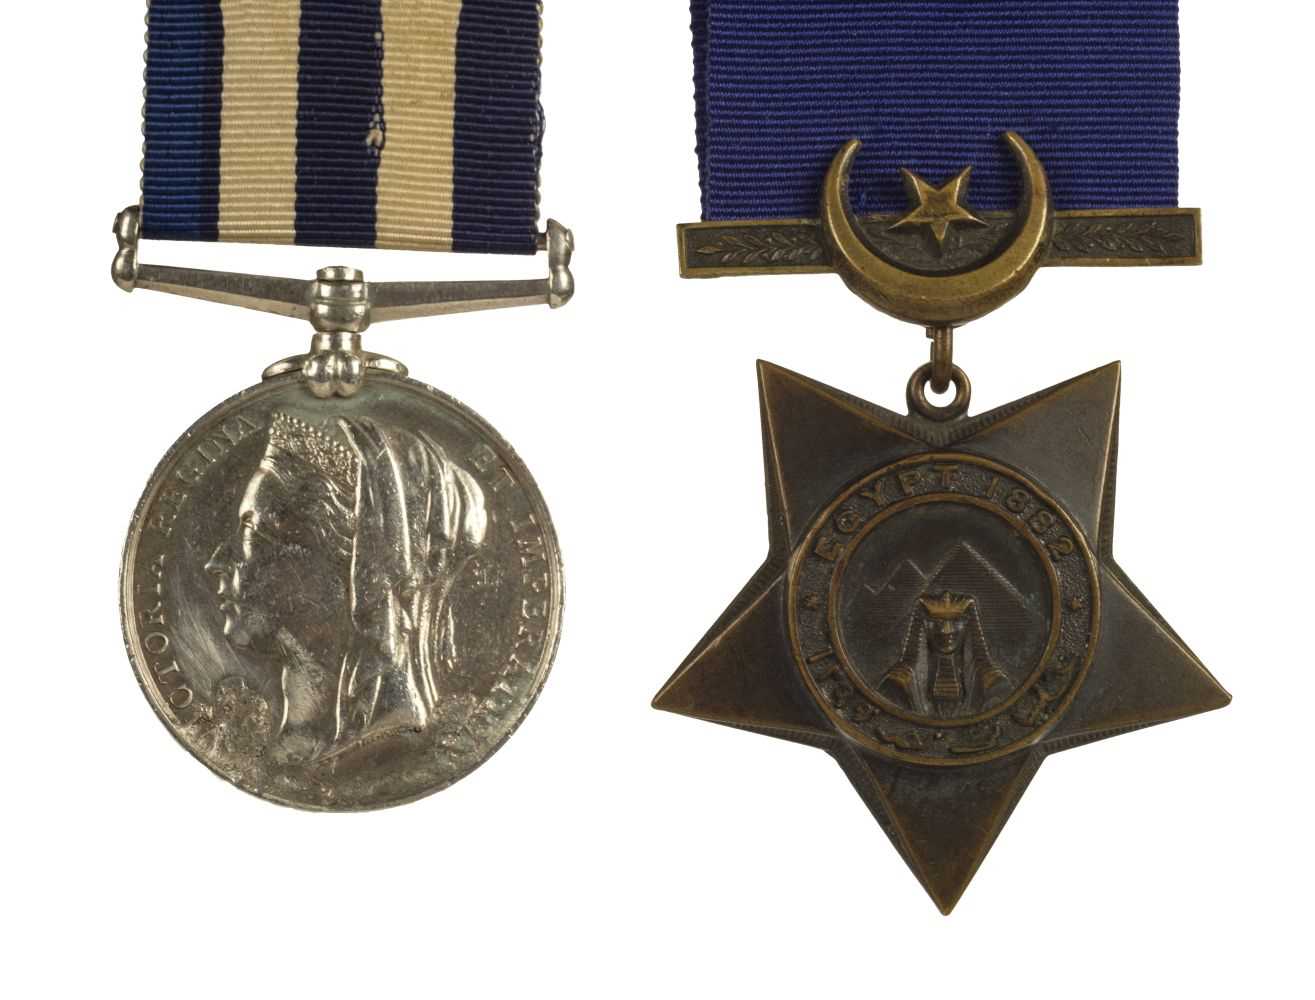 Lot 20 - Egypt. A pair of medals - Able Seaman W.J. Walsh, Royal Navy